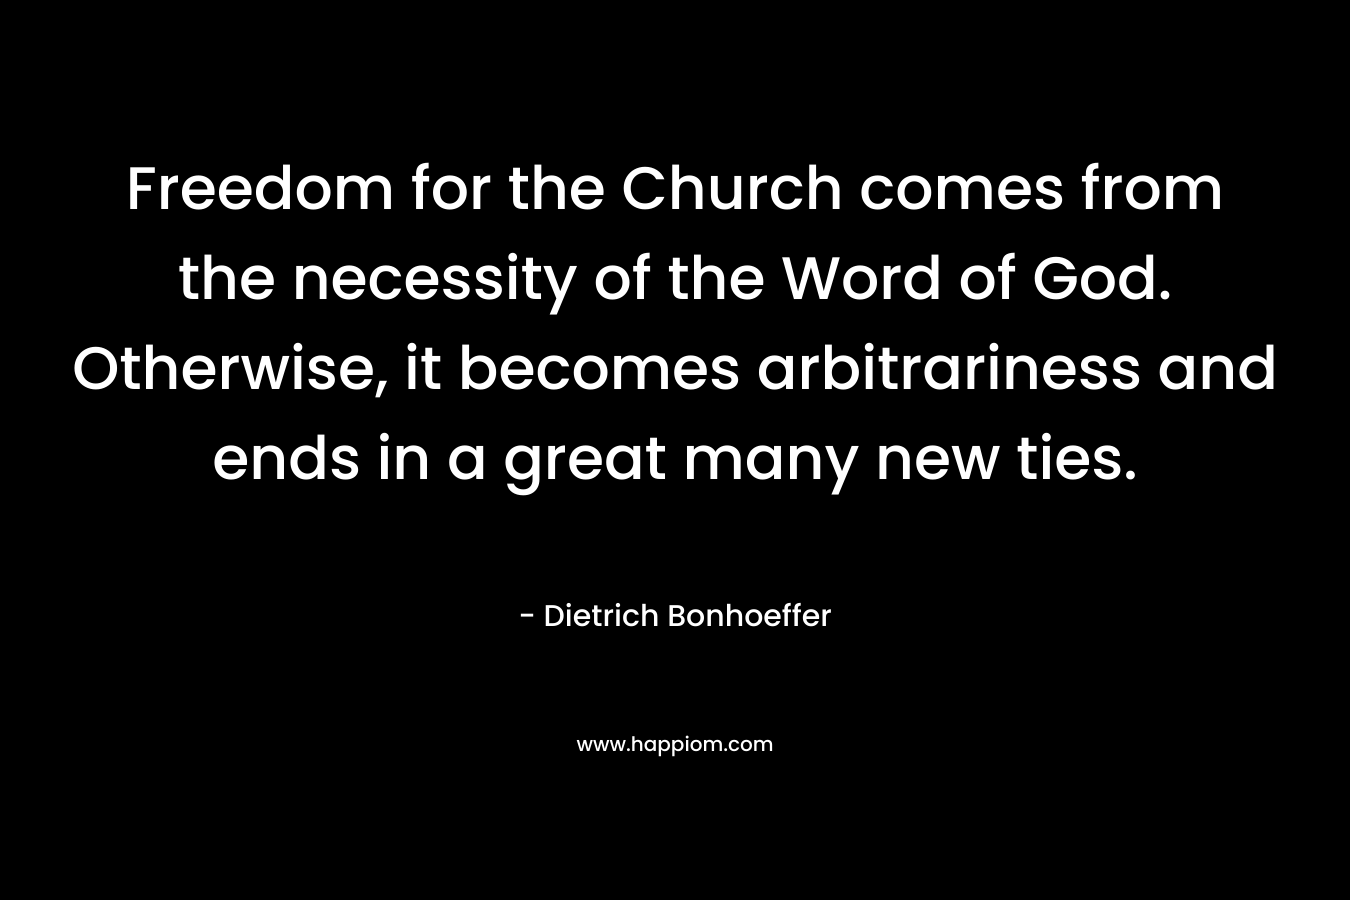 Freedom for the Church comes from the necessity of the Word of God. Otherwise, it becomes arbitrariness and ends in a great many new ties. – Dietrich Bonhoeffer